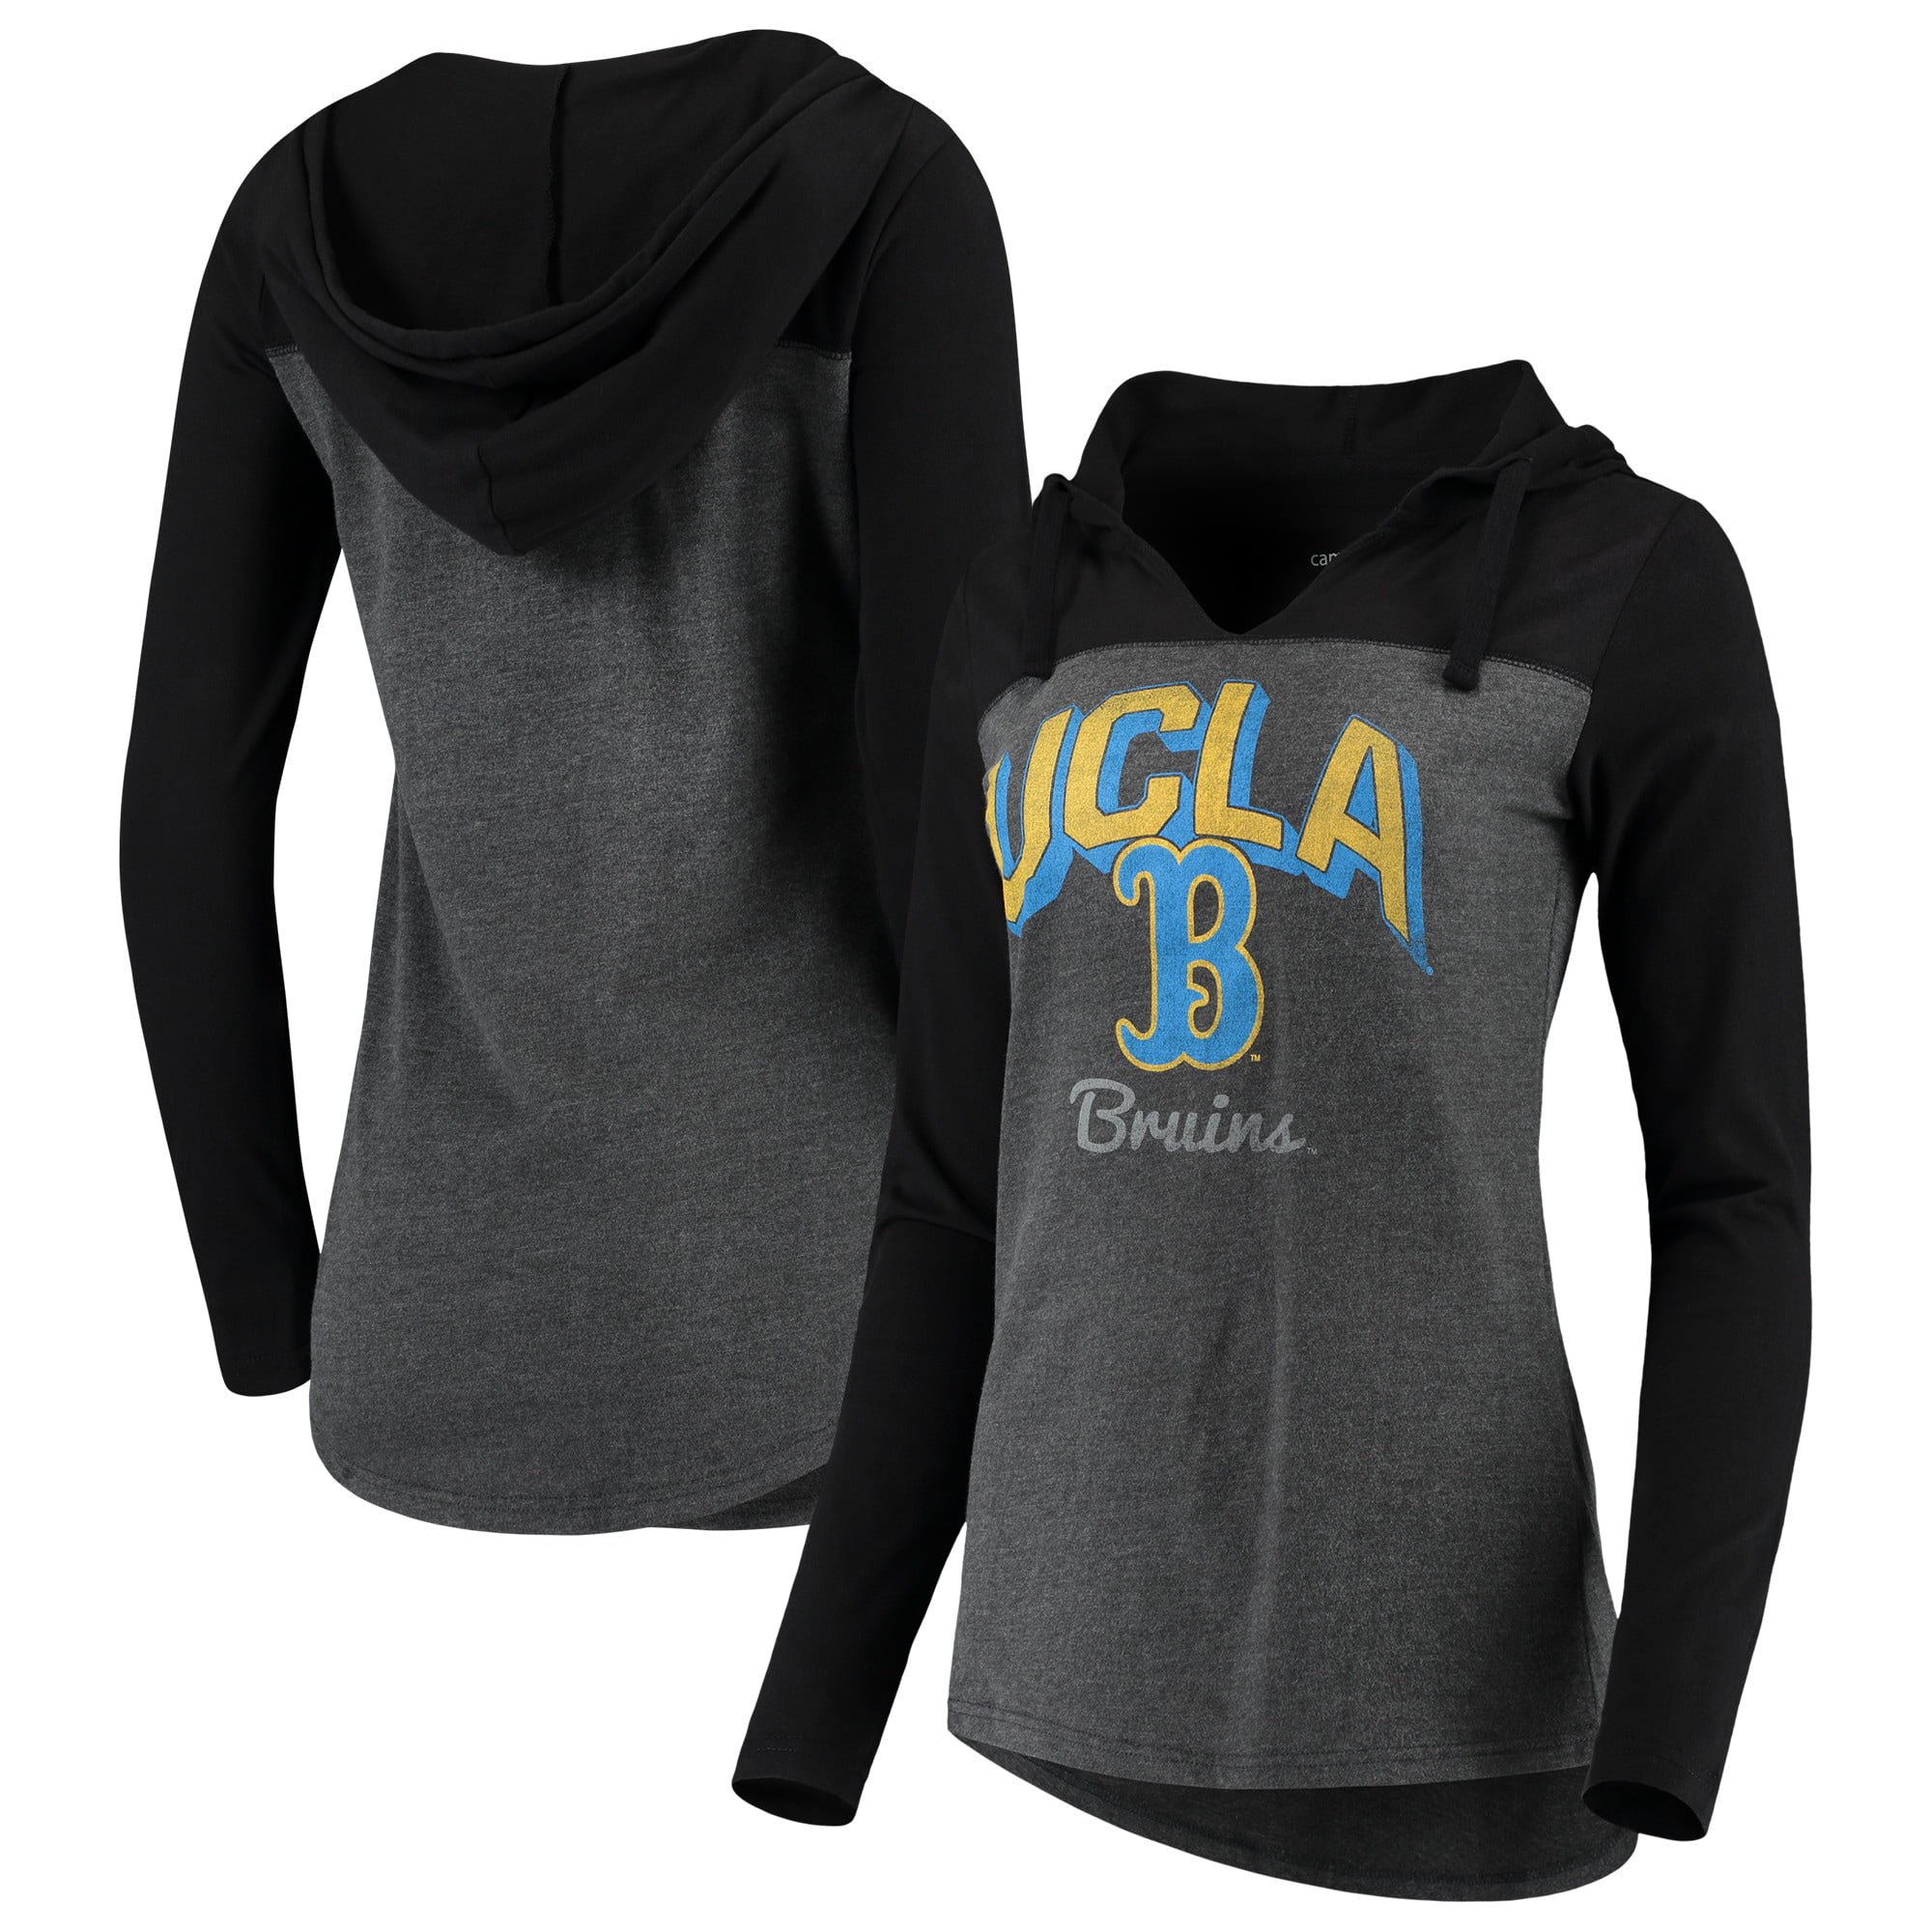 UCLA Bruins 100% Cotton  Ships in 1 Business Day